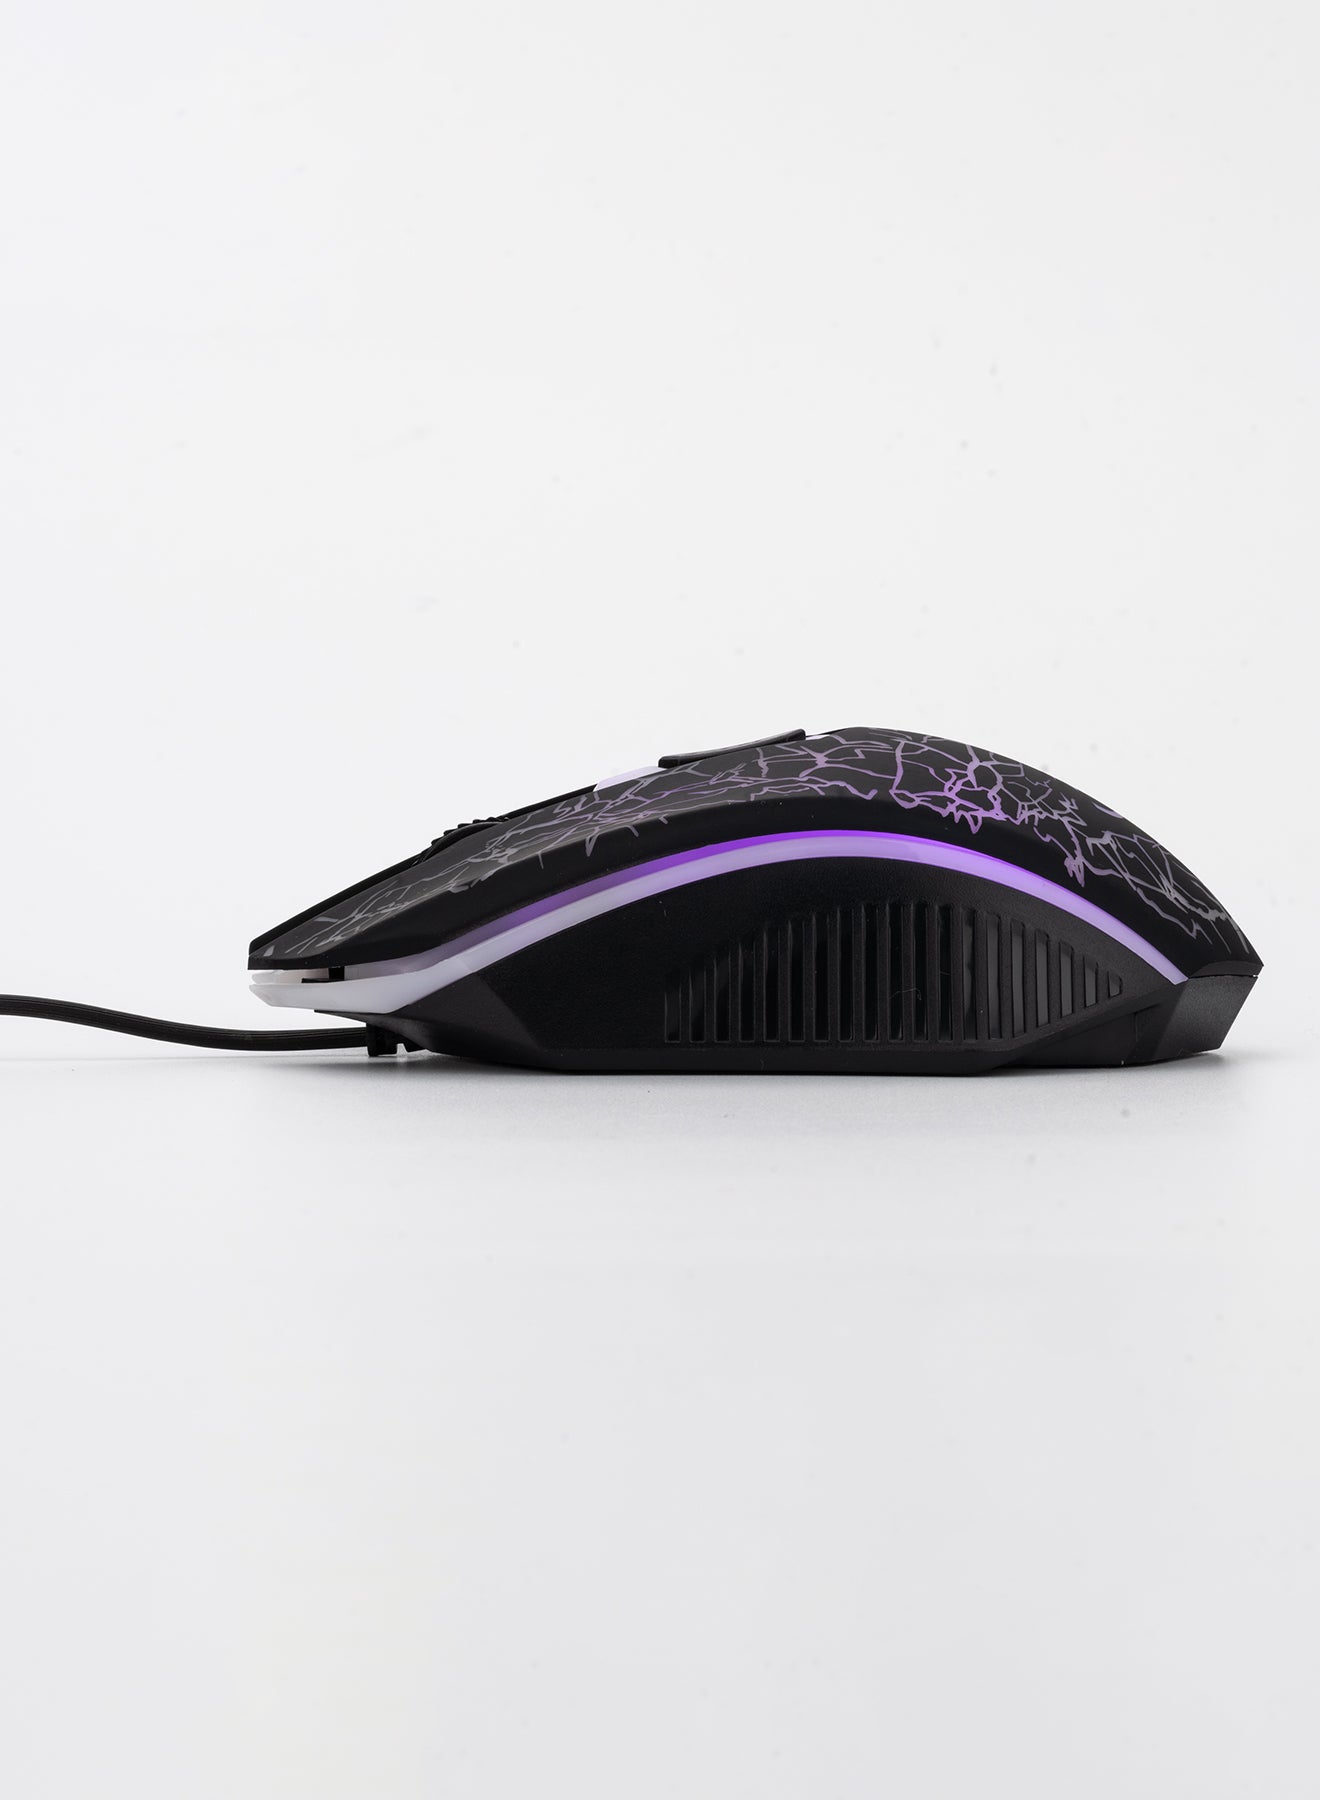 Thunder Wired Mouse And Keyboard Set with RGB lights and Adjustable DPI 